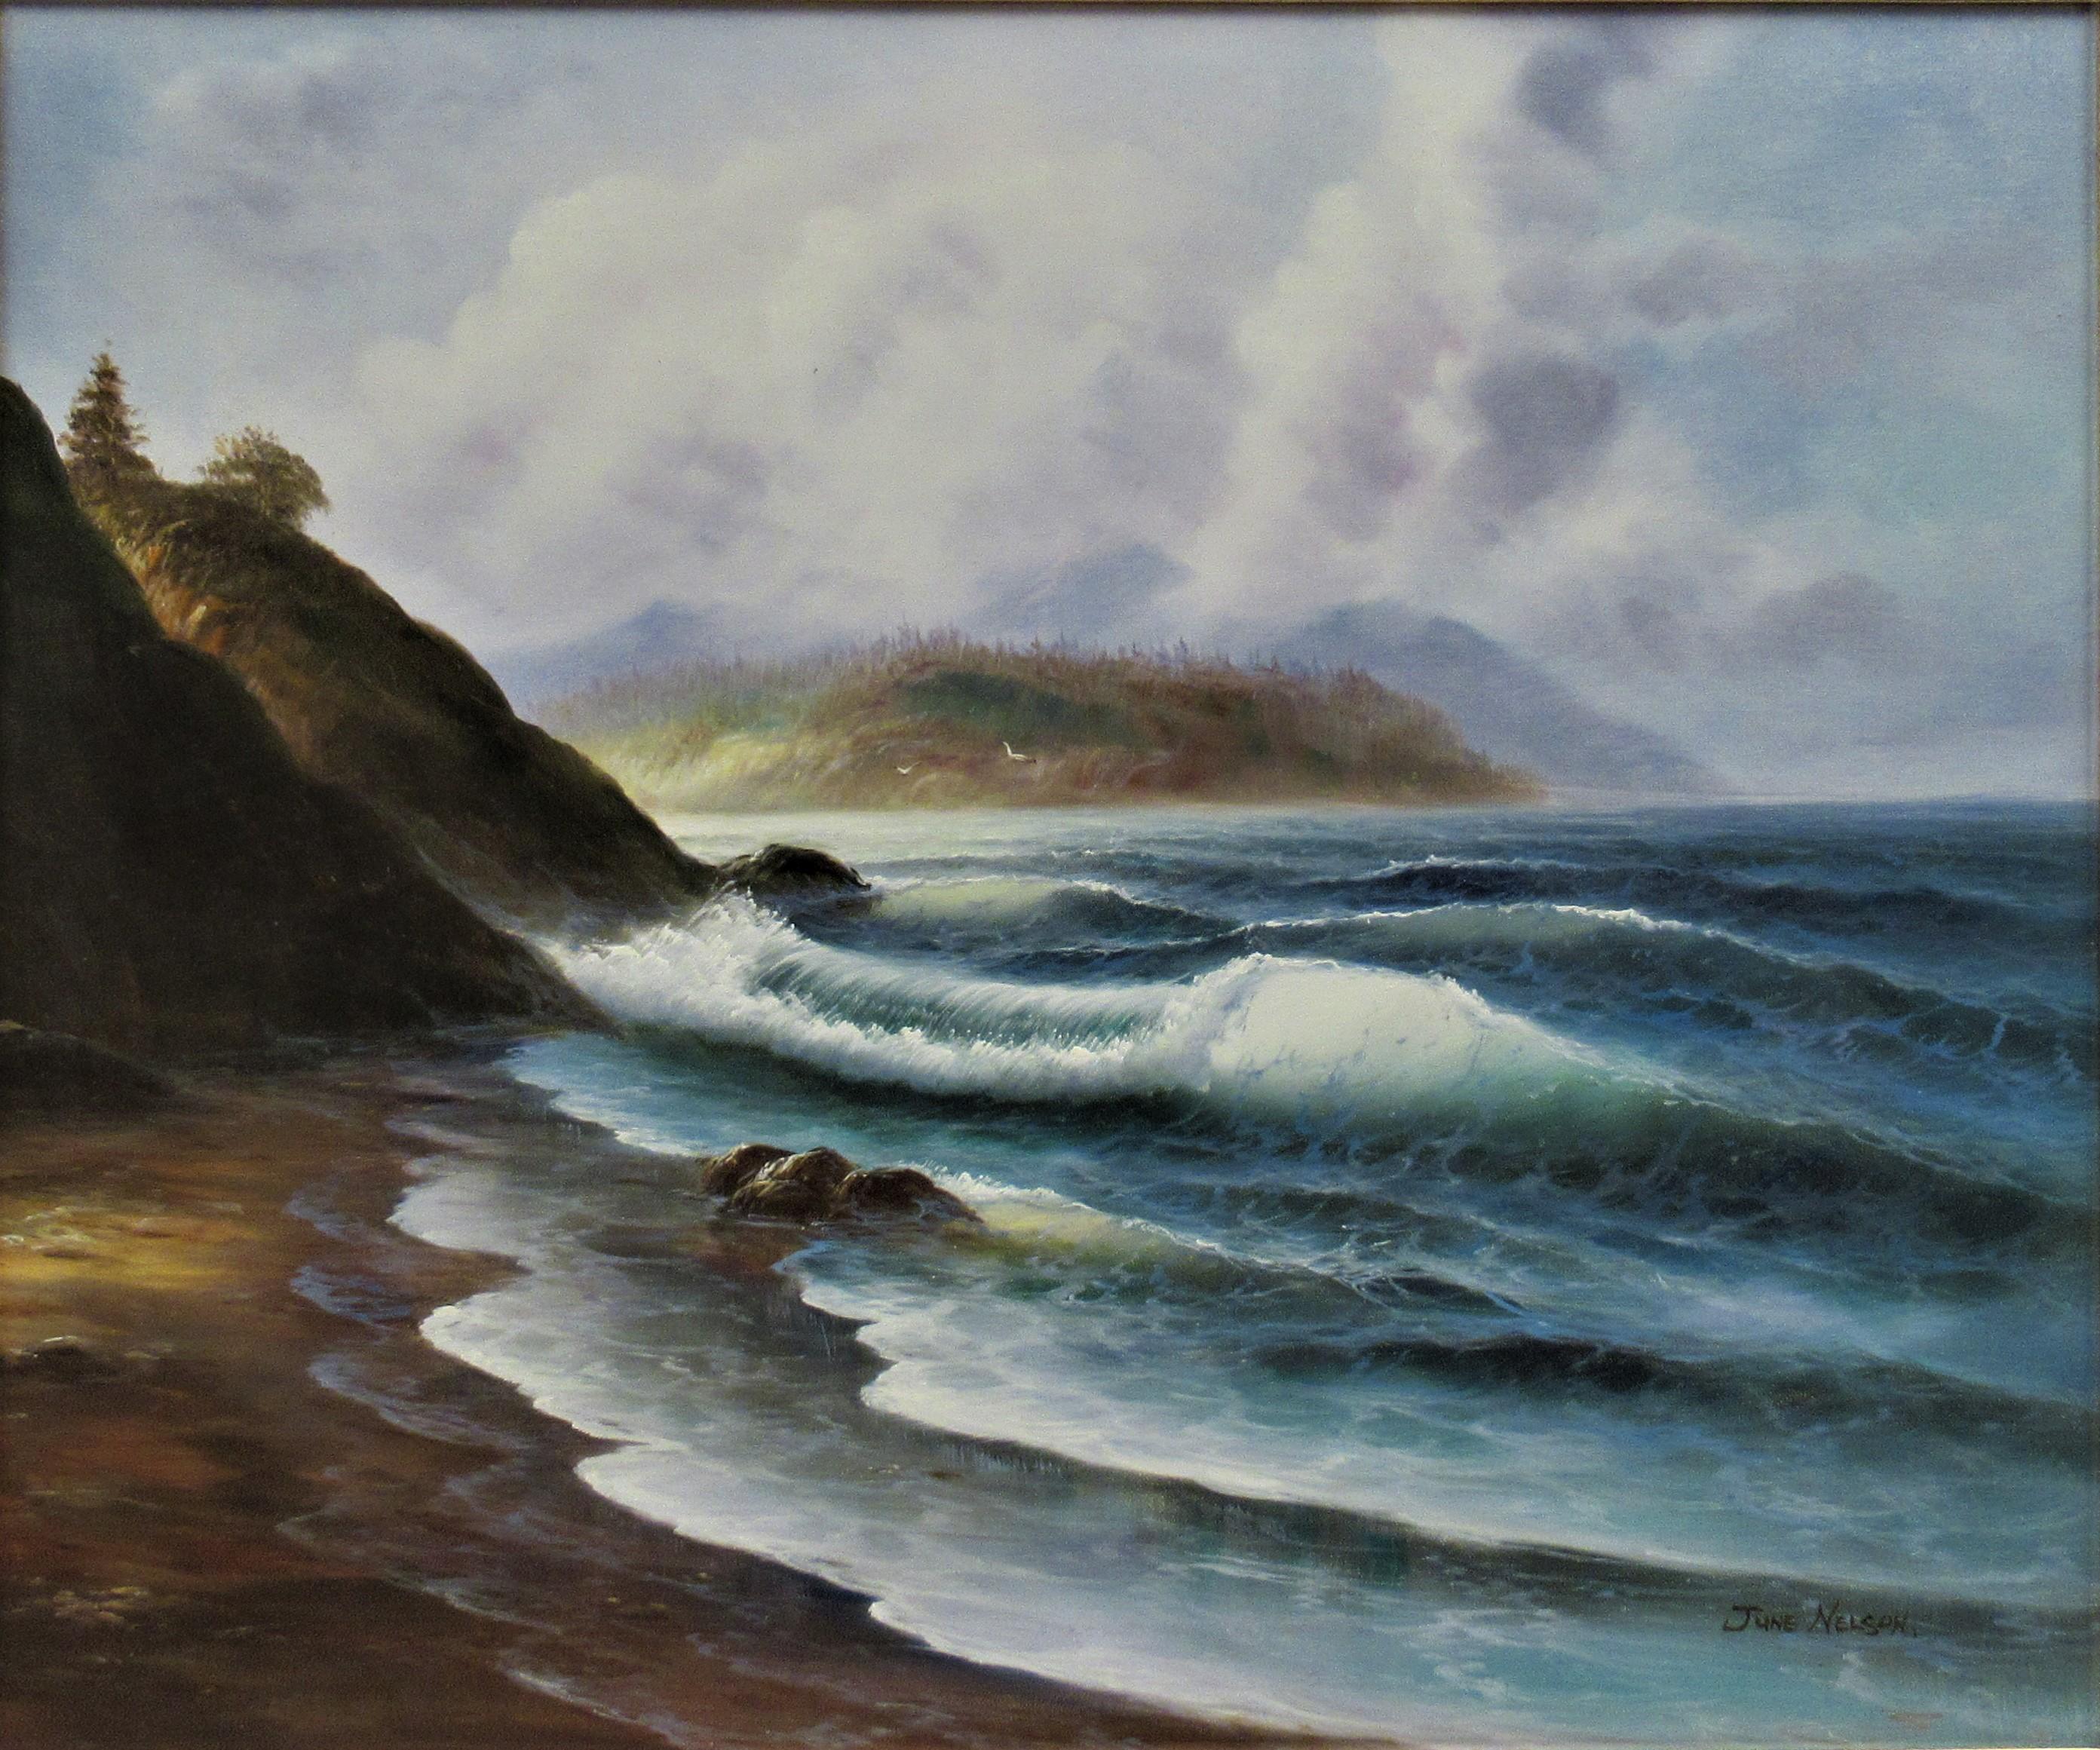 Seascape - Painting by june nelson